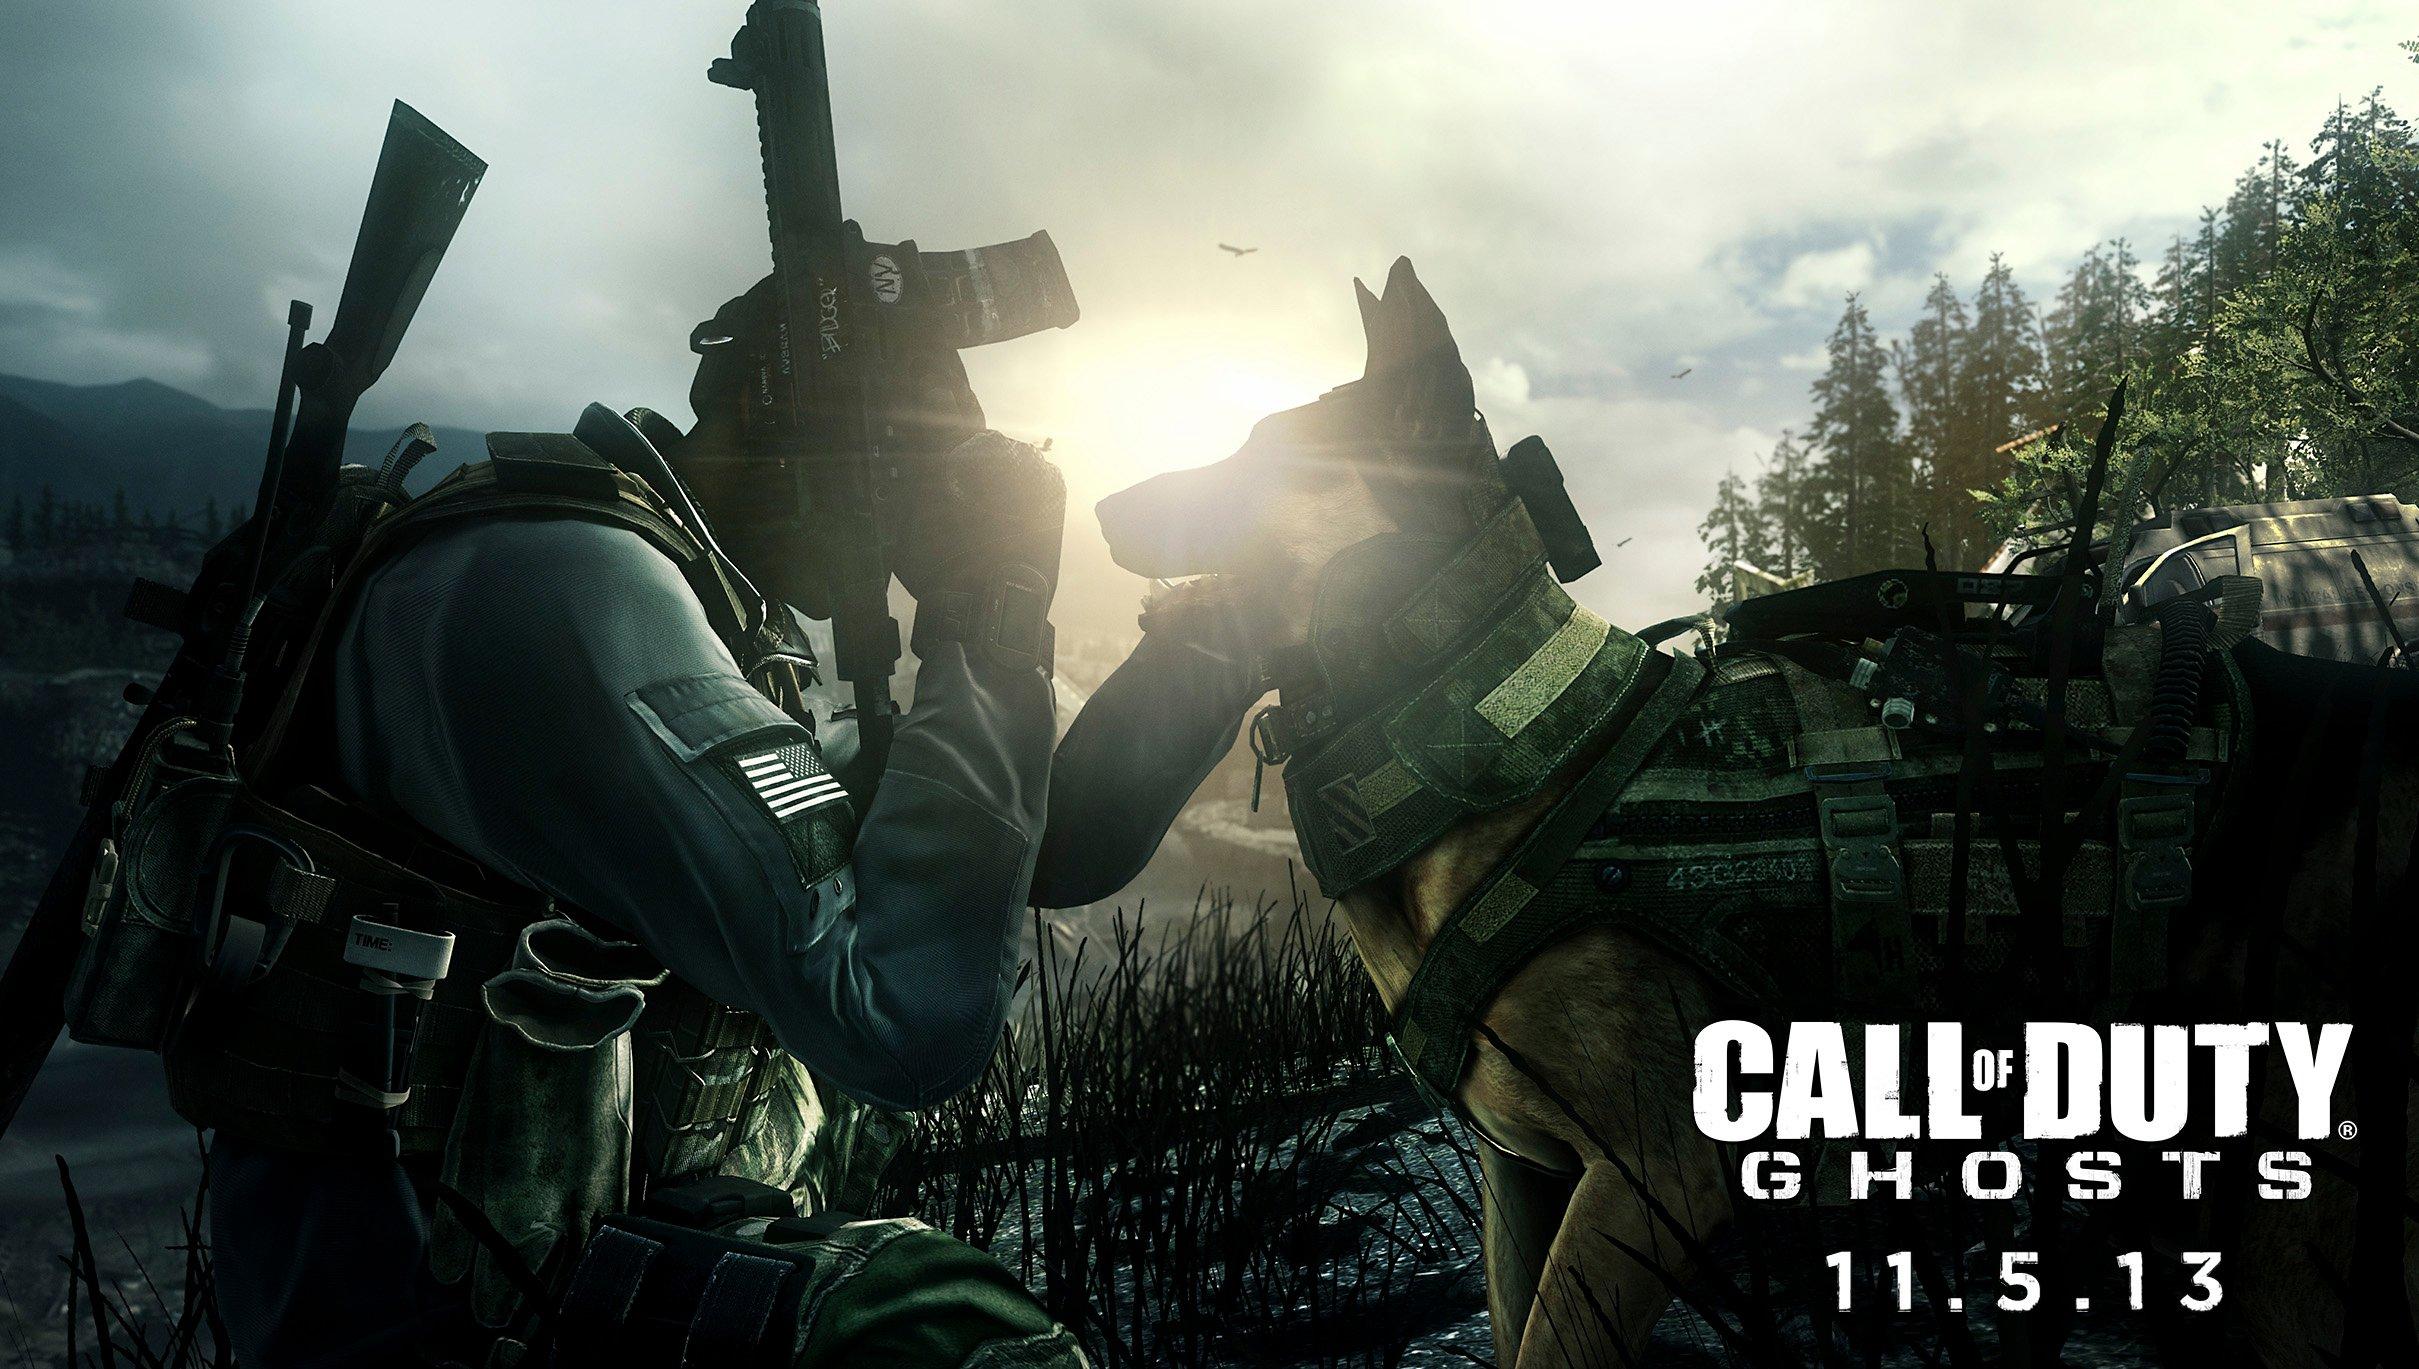 Call of Duty: Ghosts - Xbox One, Xbox One